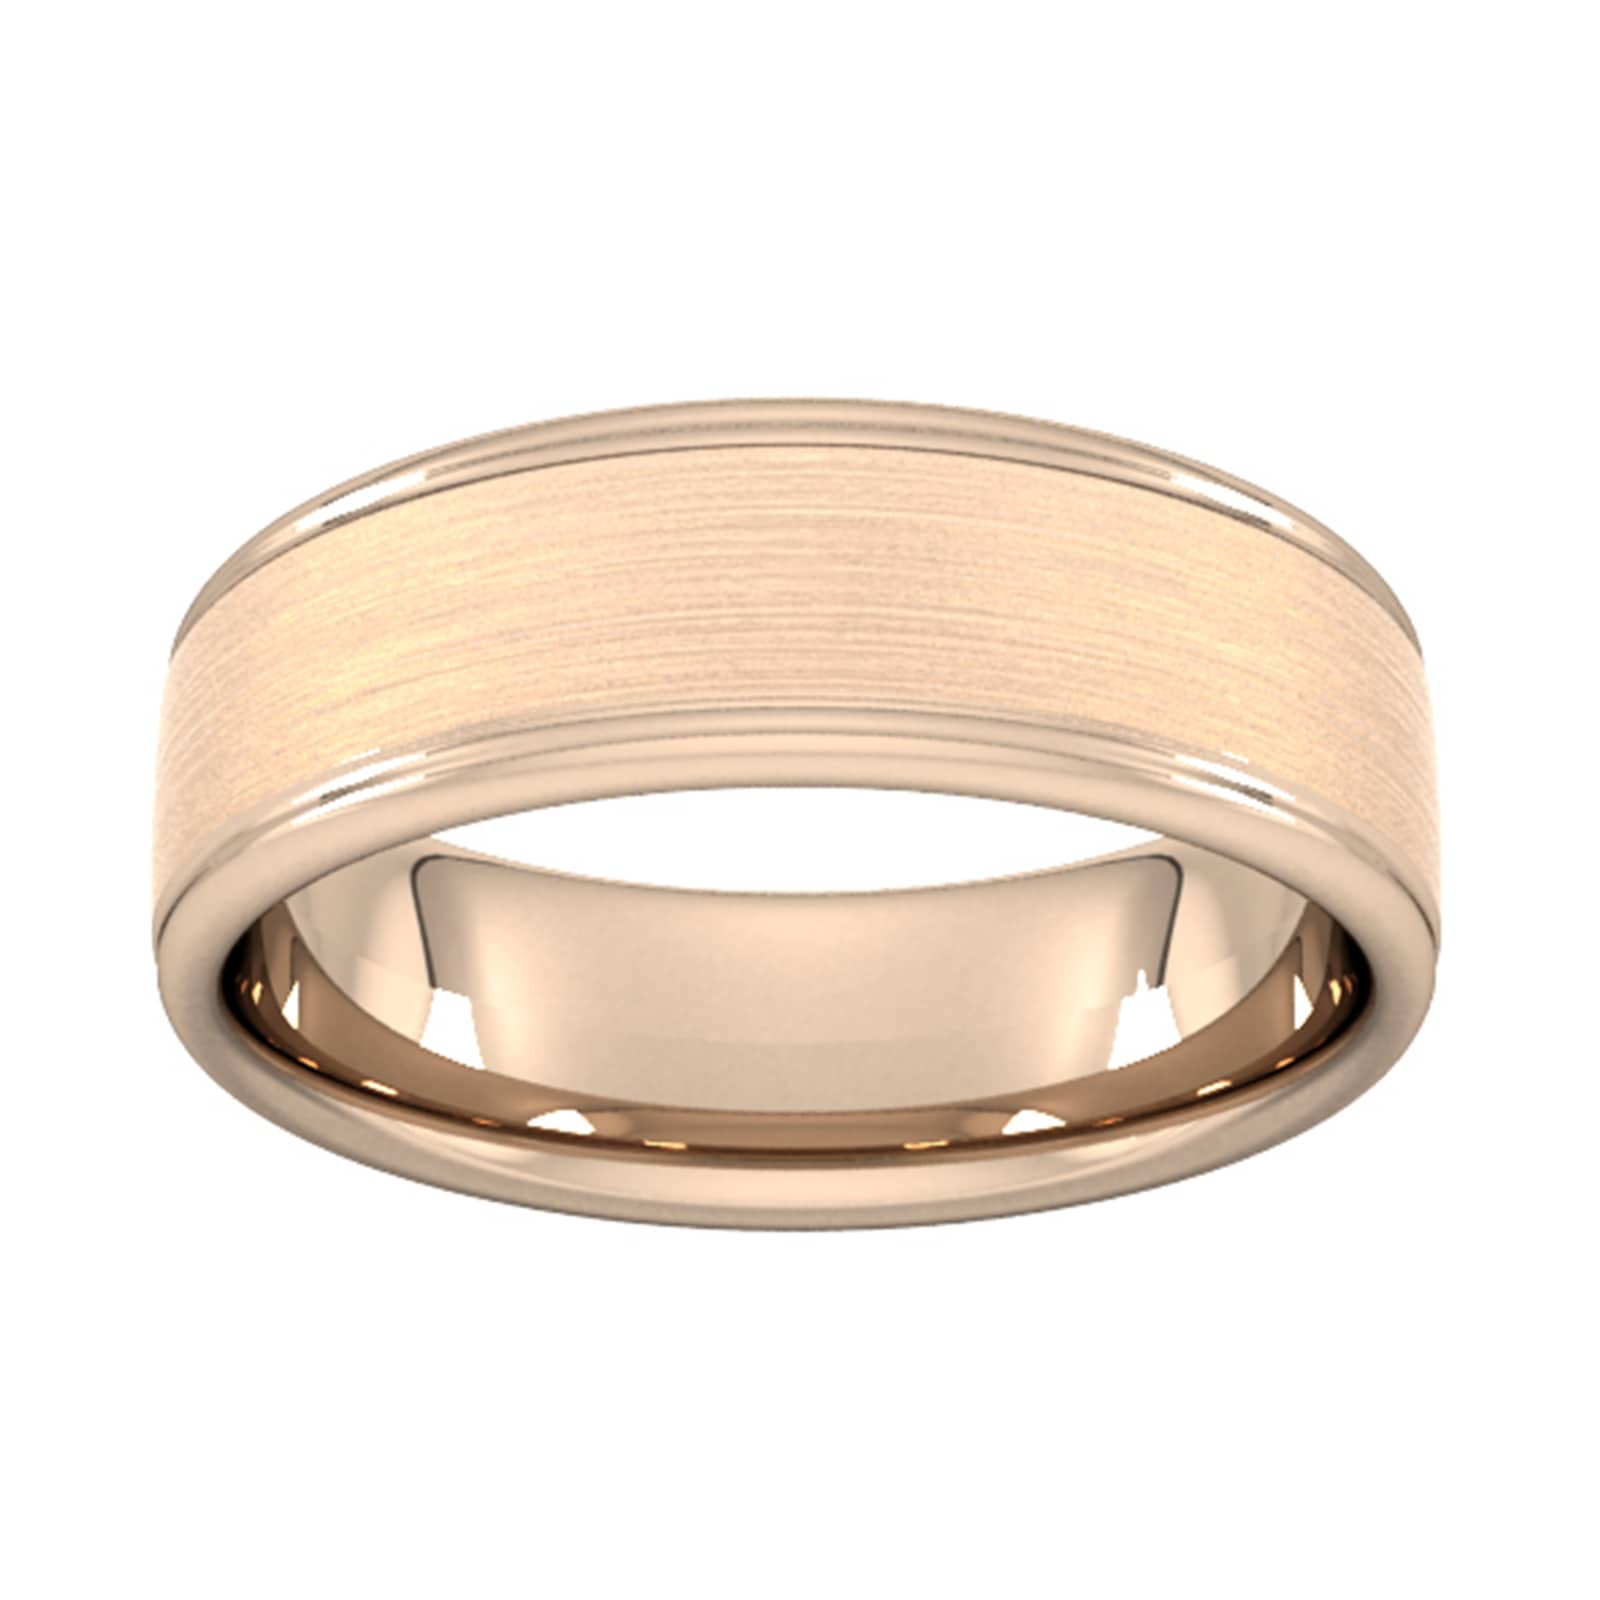 7mm Slight Court Heavy Matt Centre With Grooves Wedding Ring In 18 Carat Rose Gold - Ring Size O